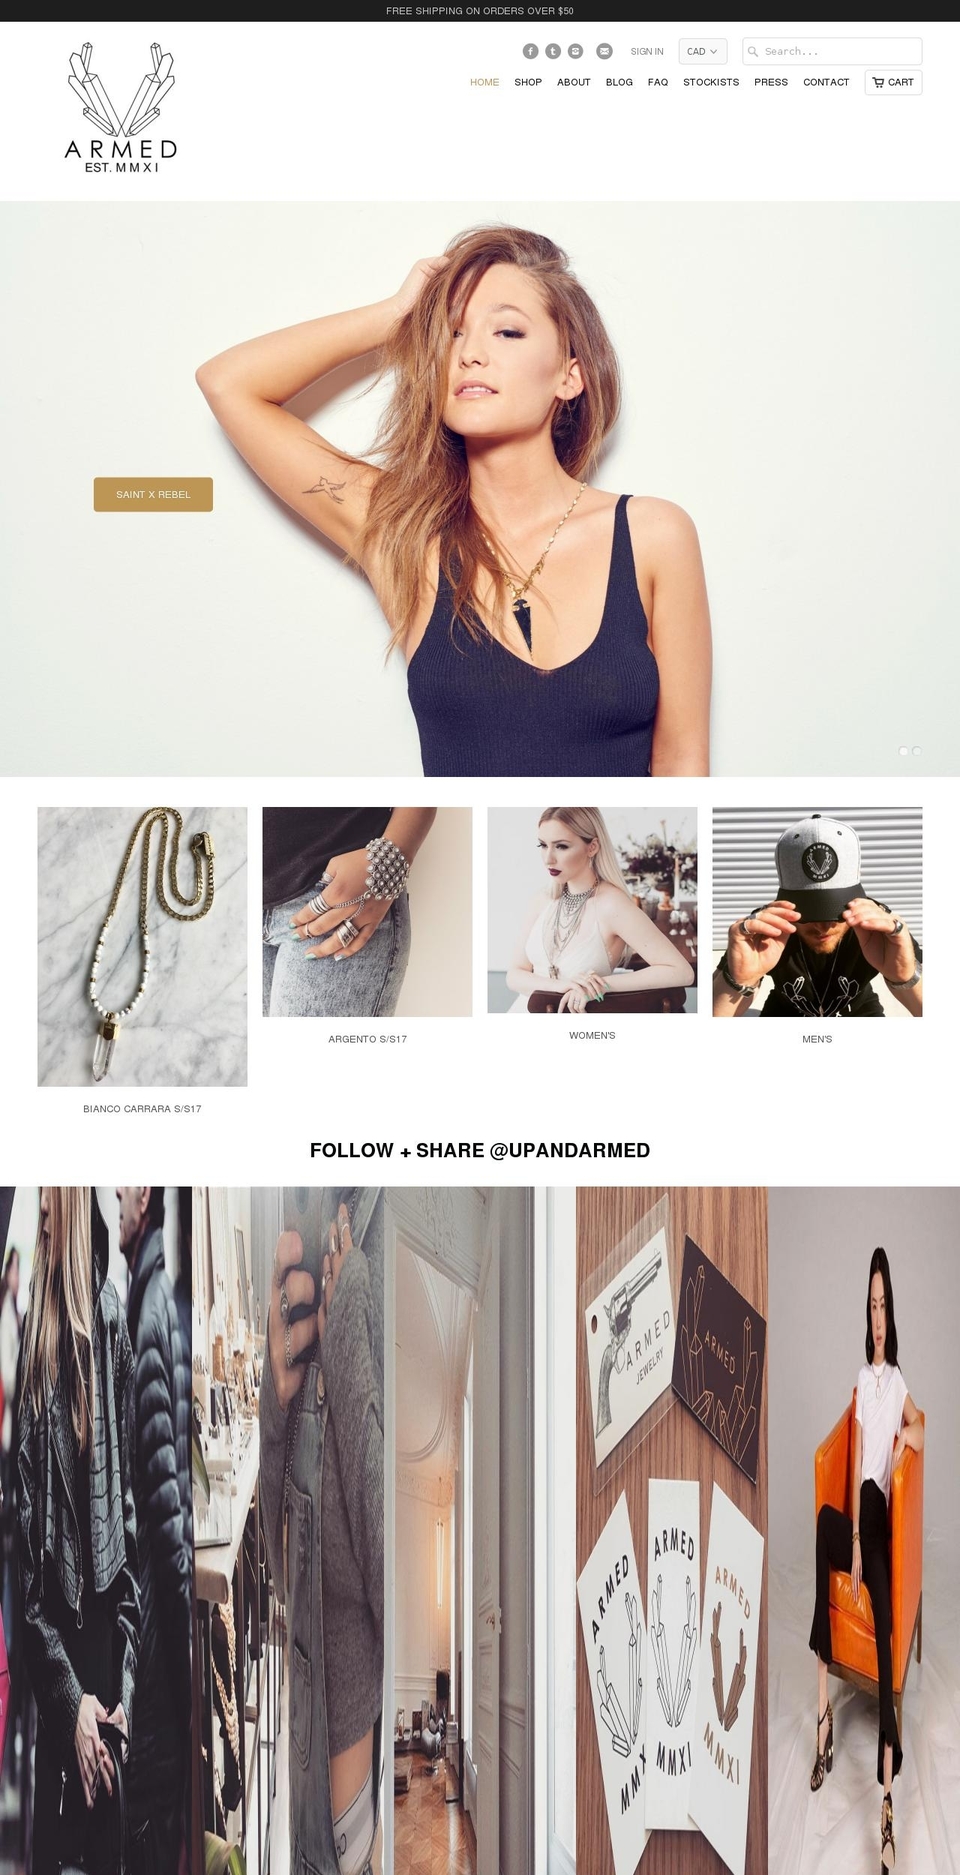 Editions Shopify theme site example upandarmed.com